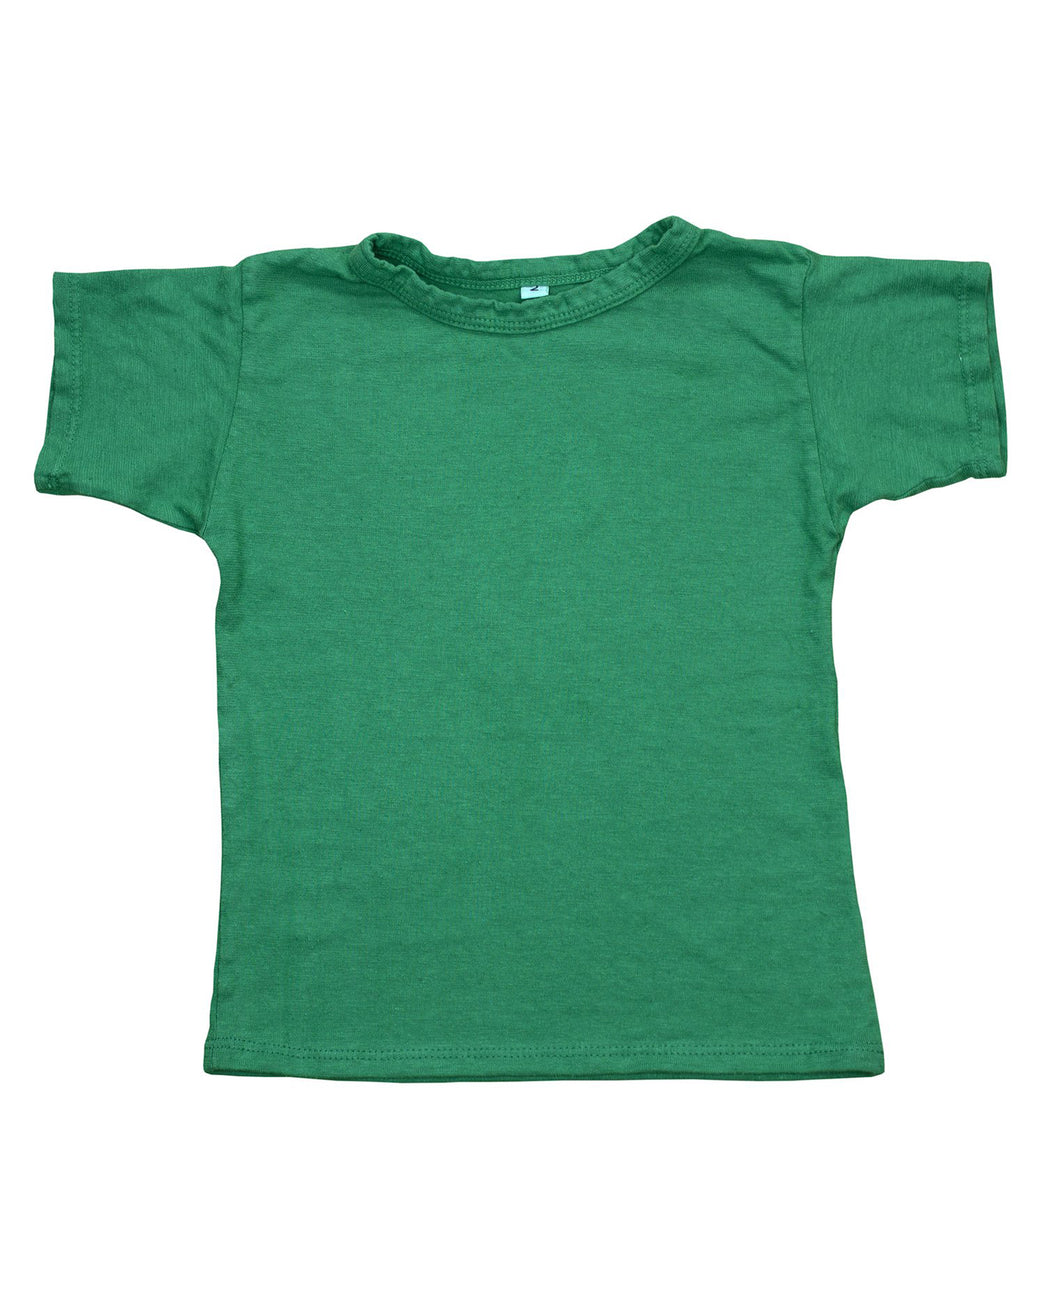 Grom Kid's Tee – Assorted Colors